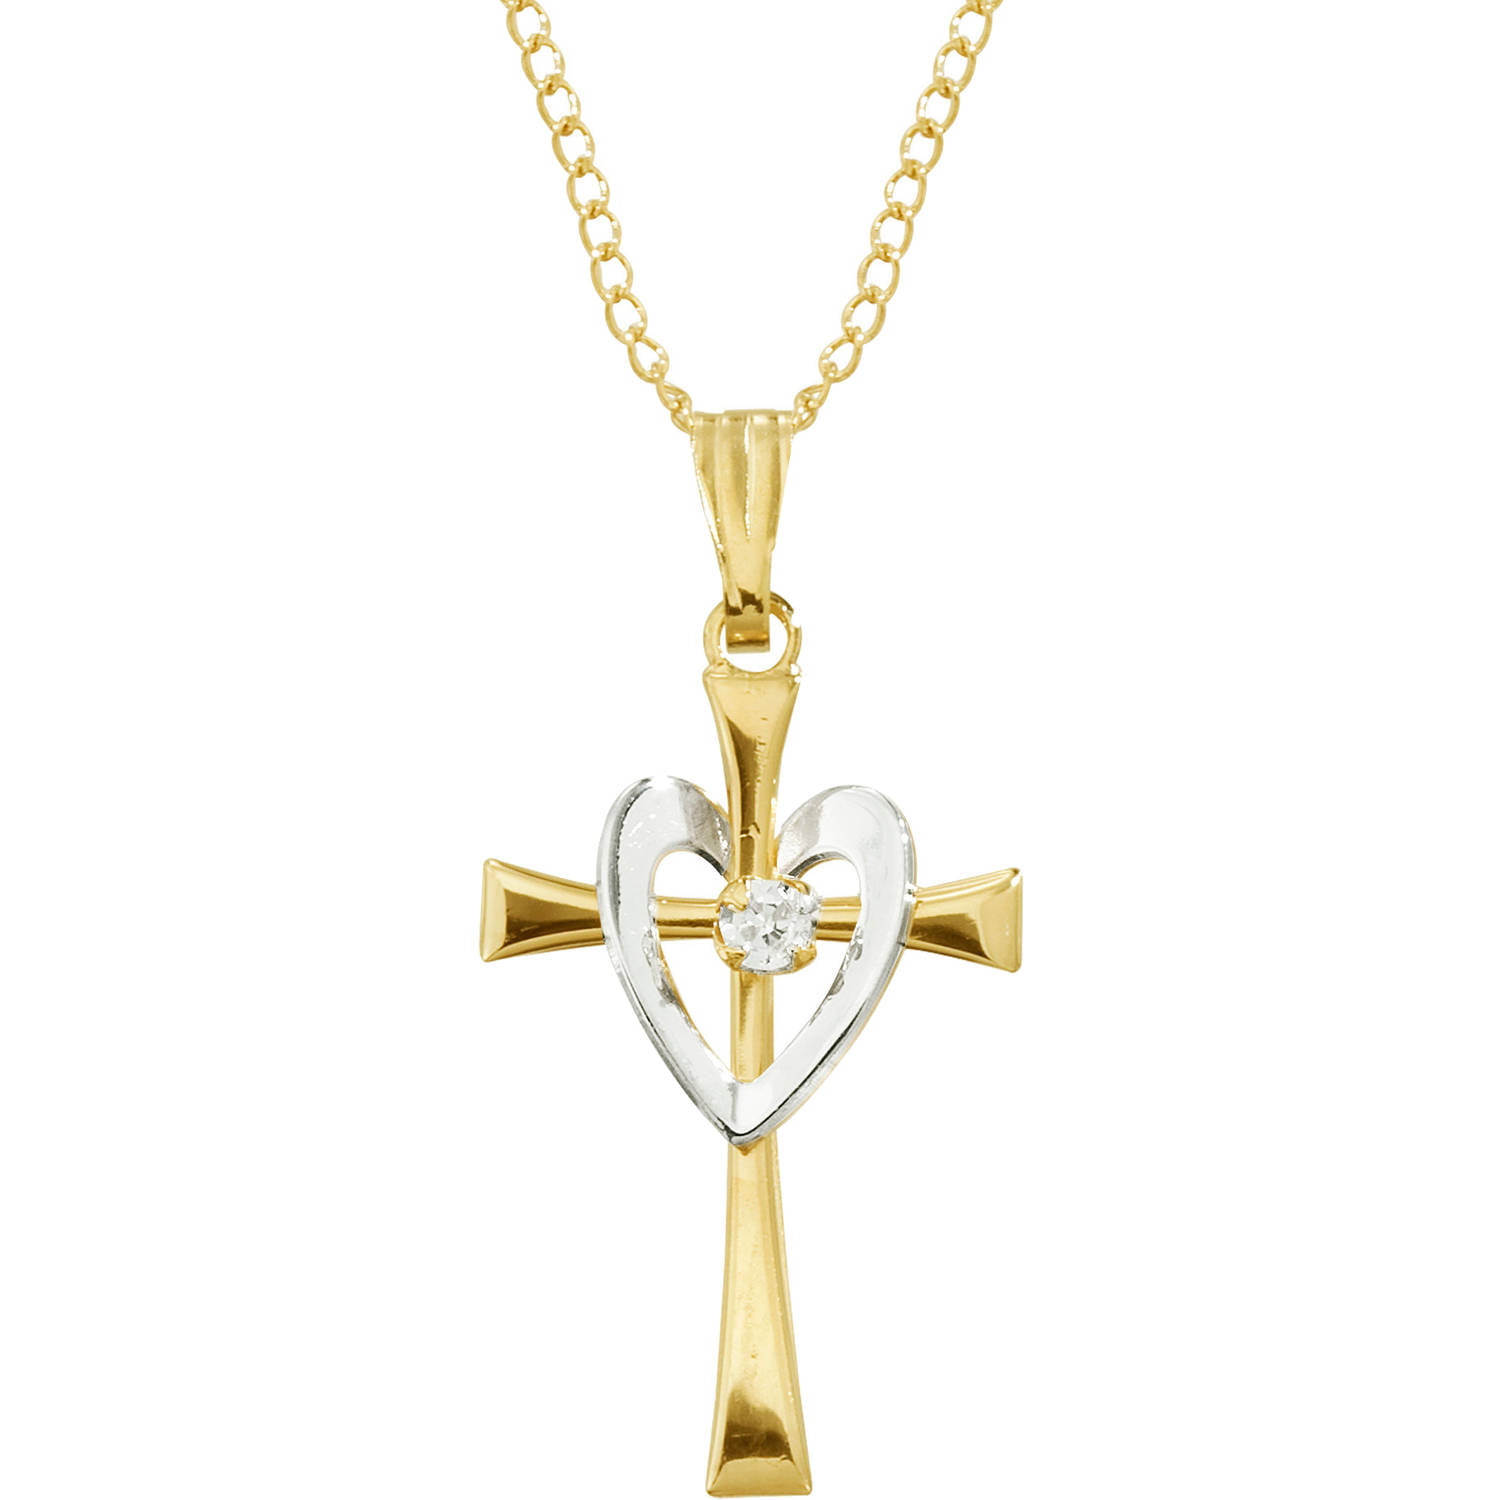 TONYS JEWELRY CO 14kt Gold Filled Cross Pendant